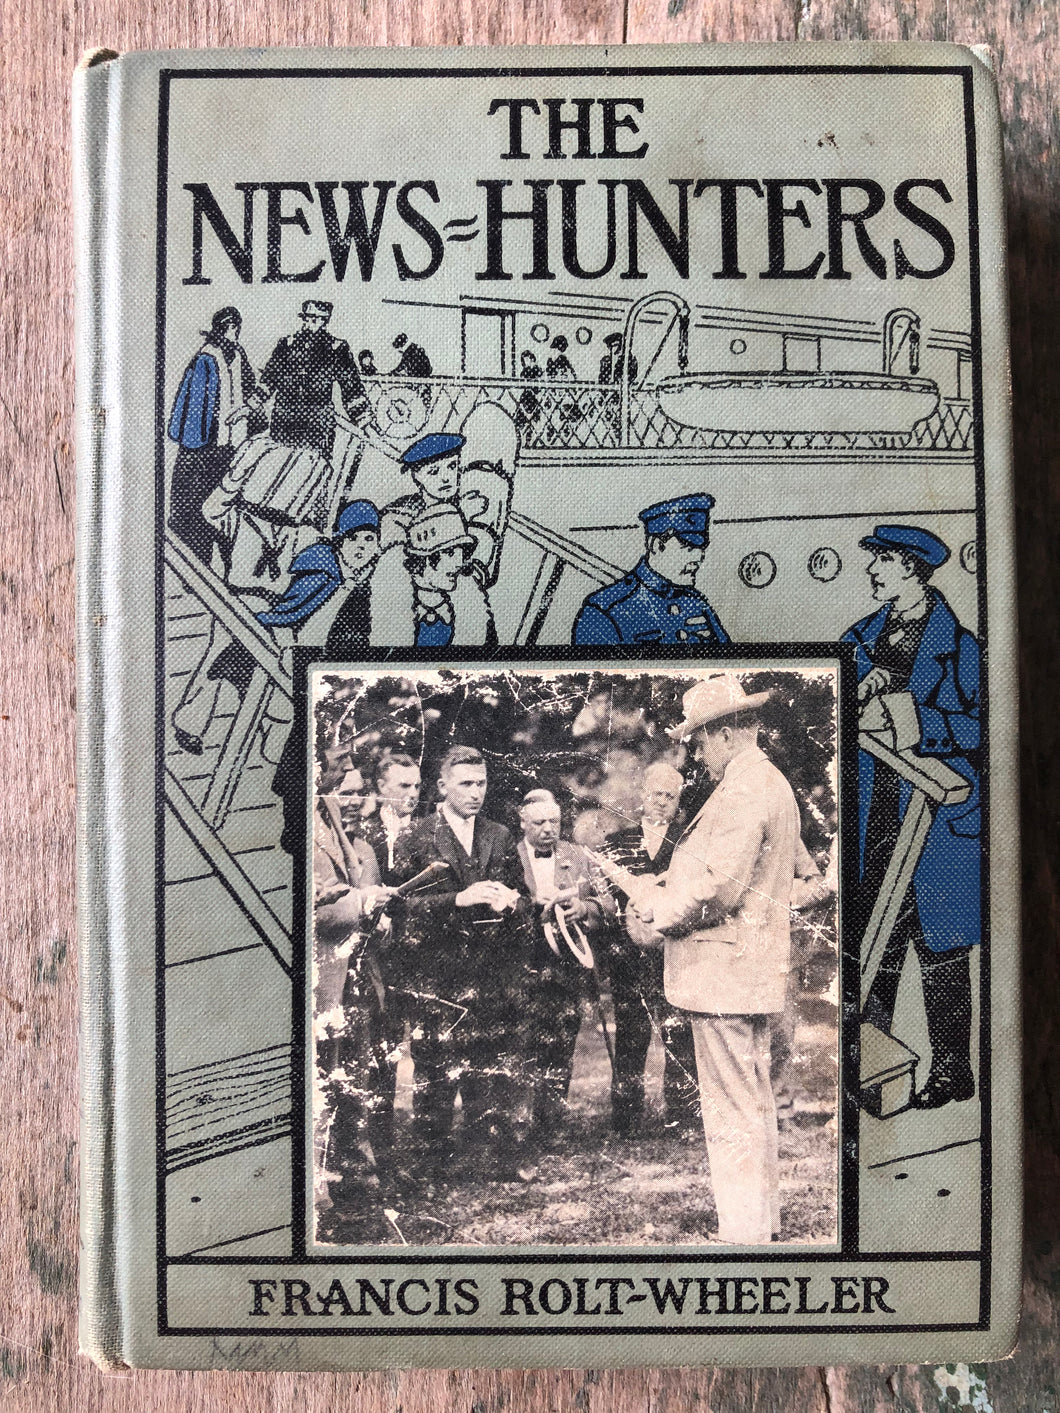 The News-Hunters. by Francis Rolt-Wheeler